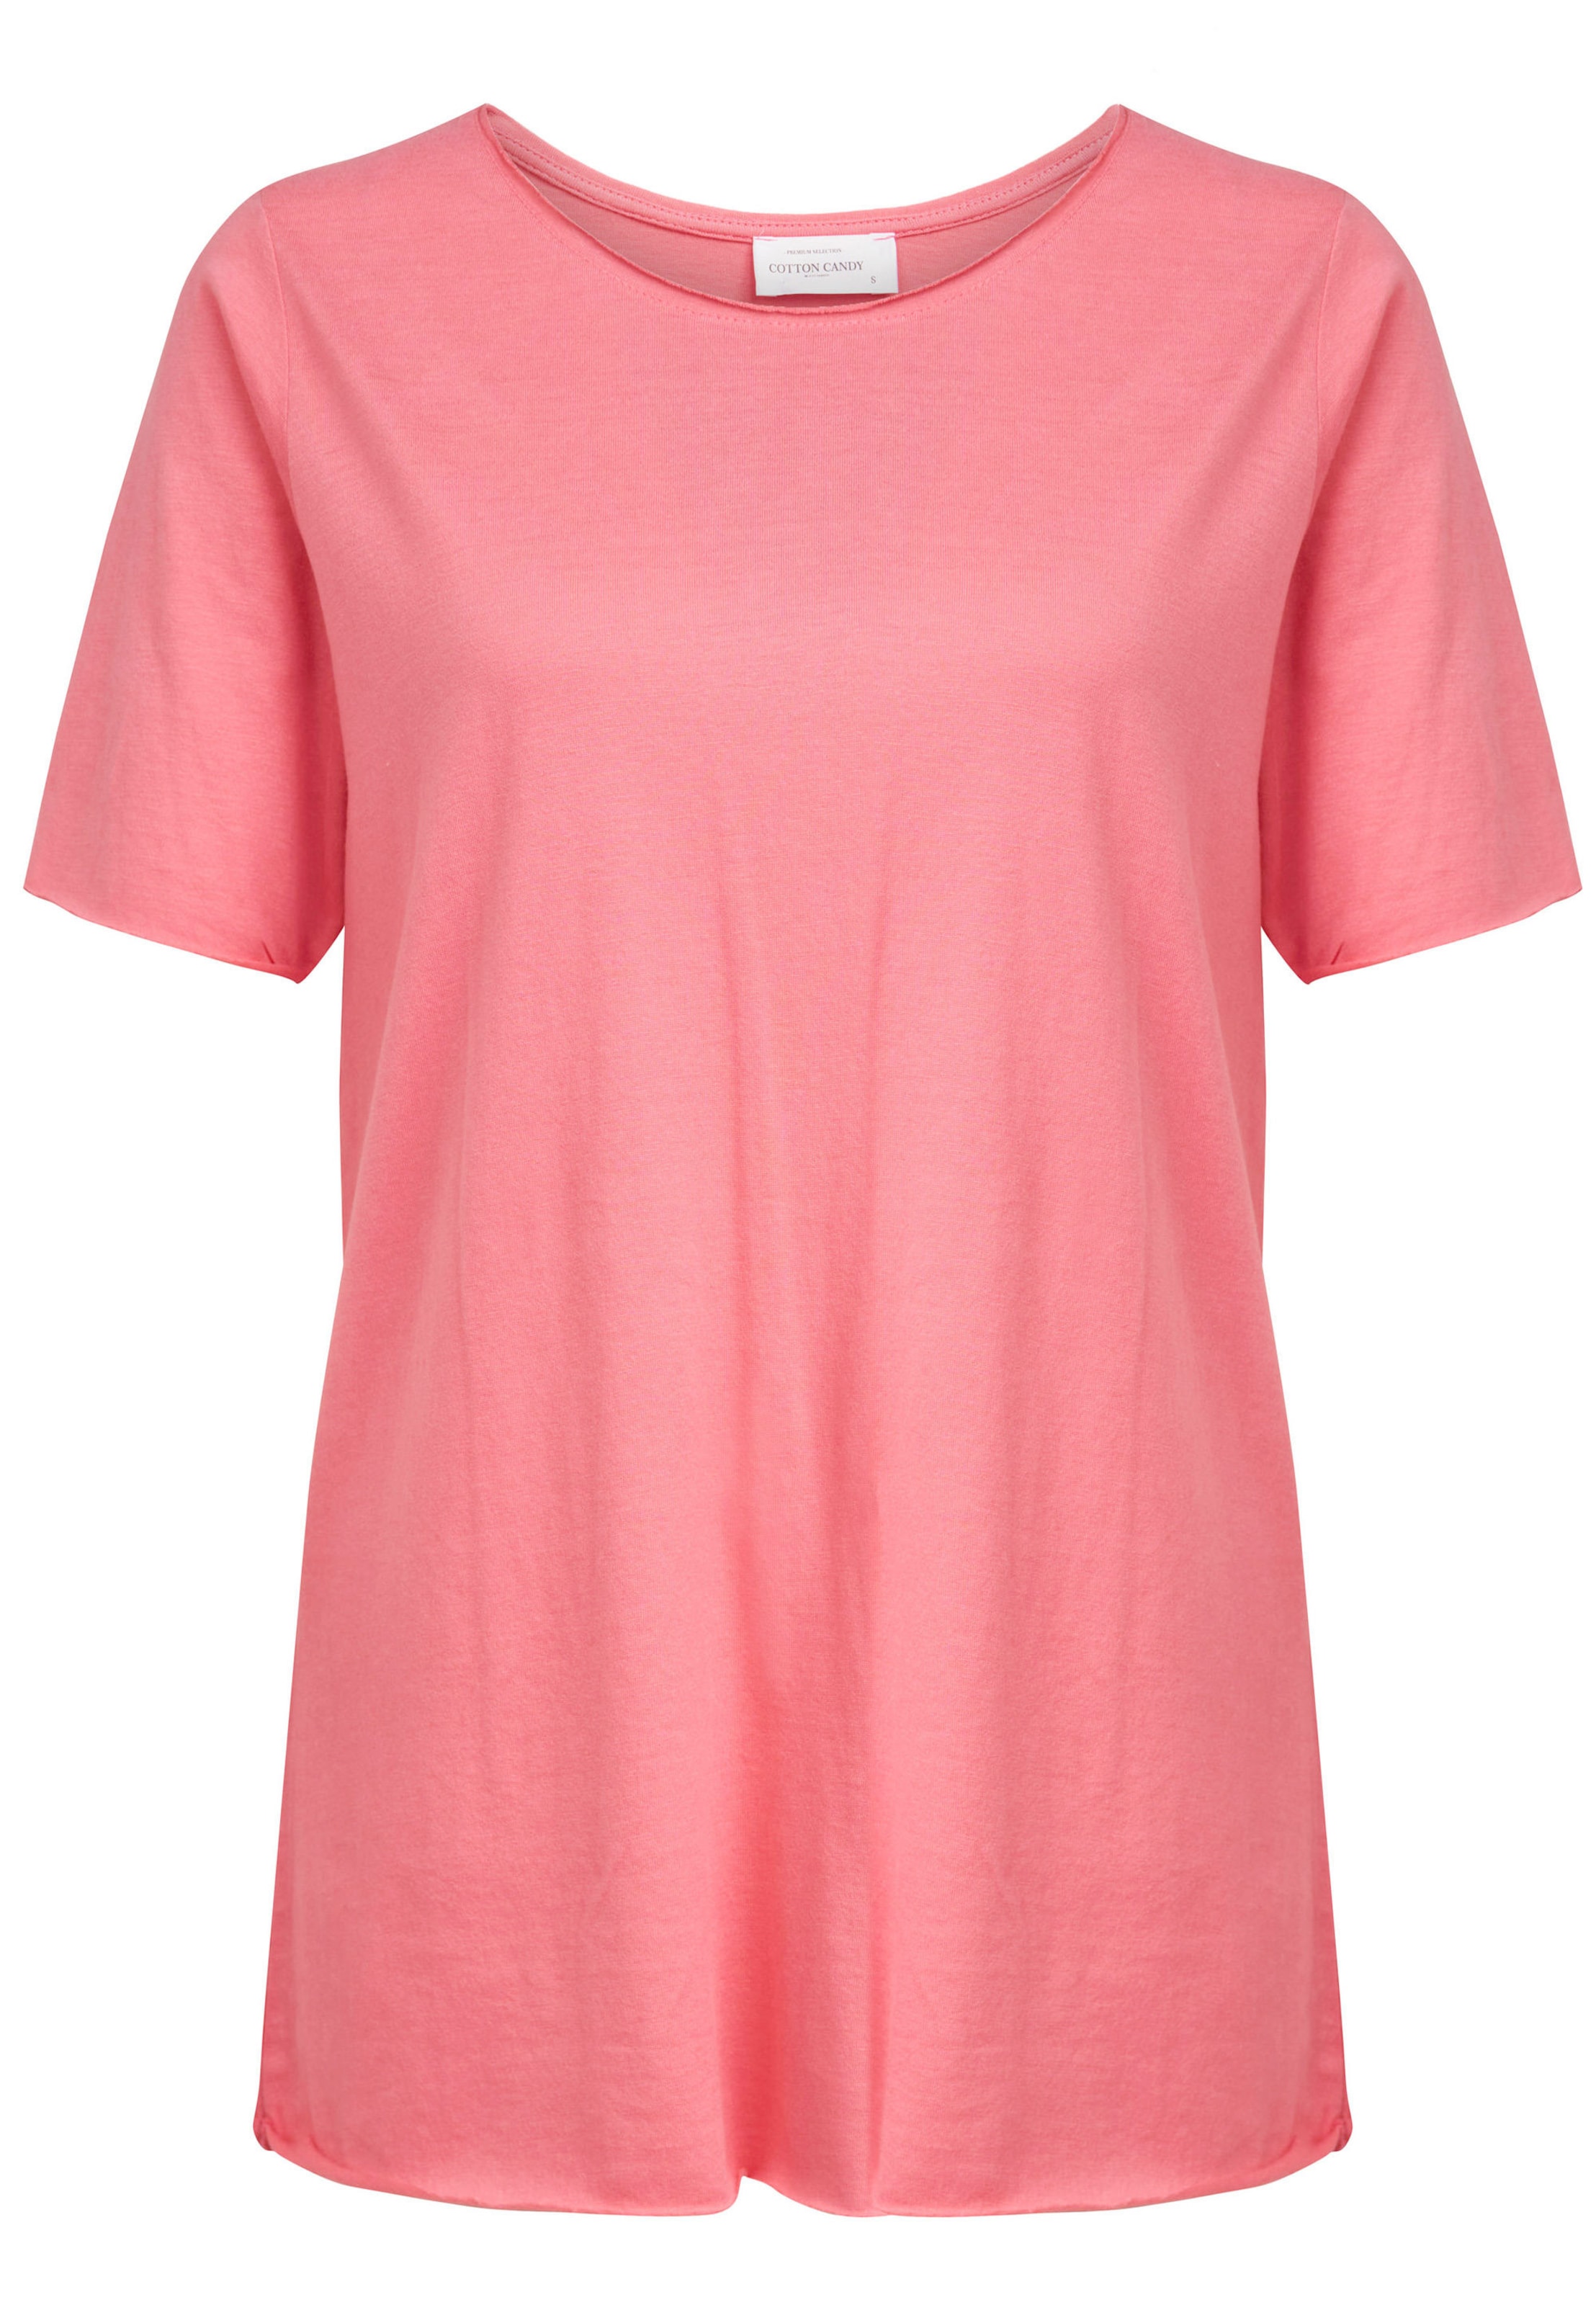 Frauen Shirts & Tops Cotton Candy T-Shirt 'PEGGY' in Pink - CU98739